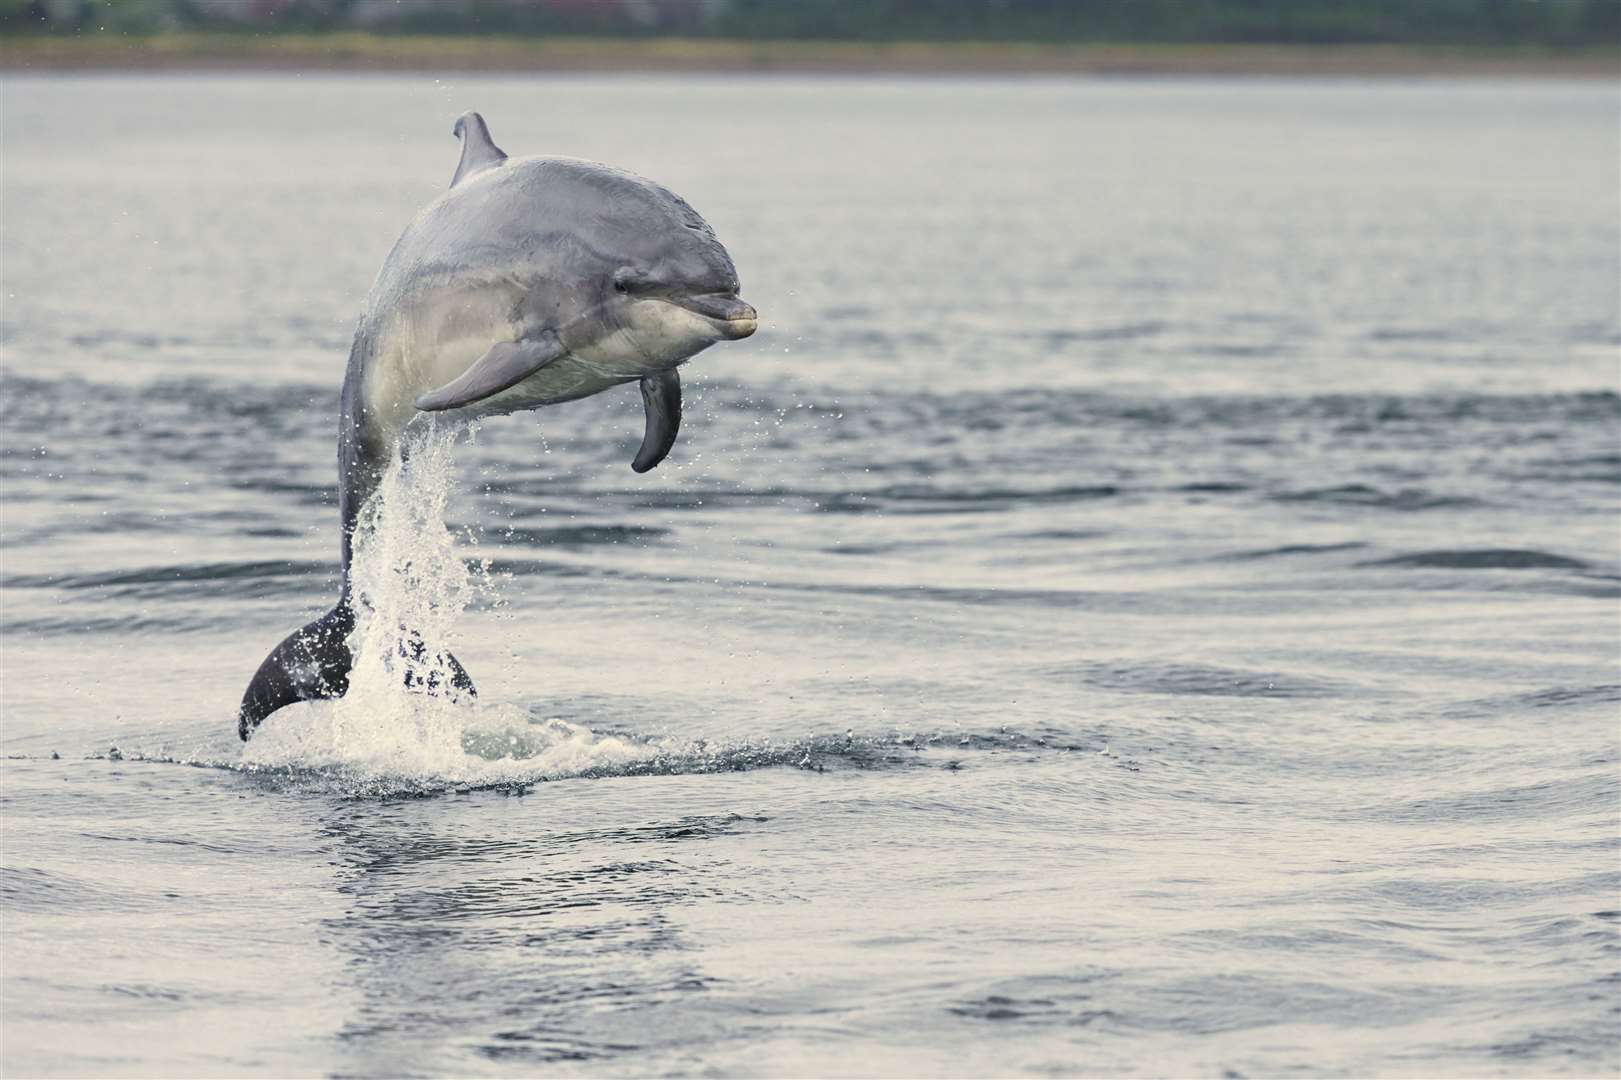 DolphinFest has launched with a series of marine-themed online events.